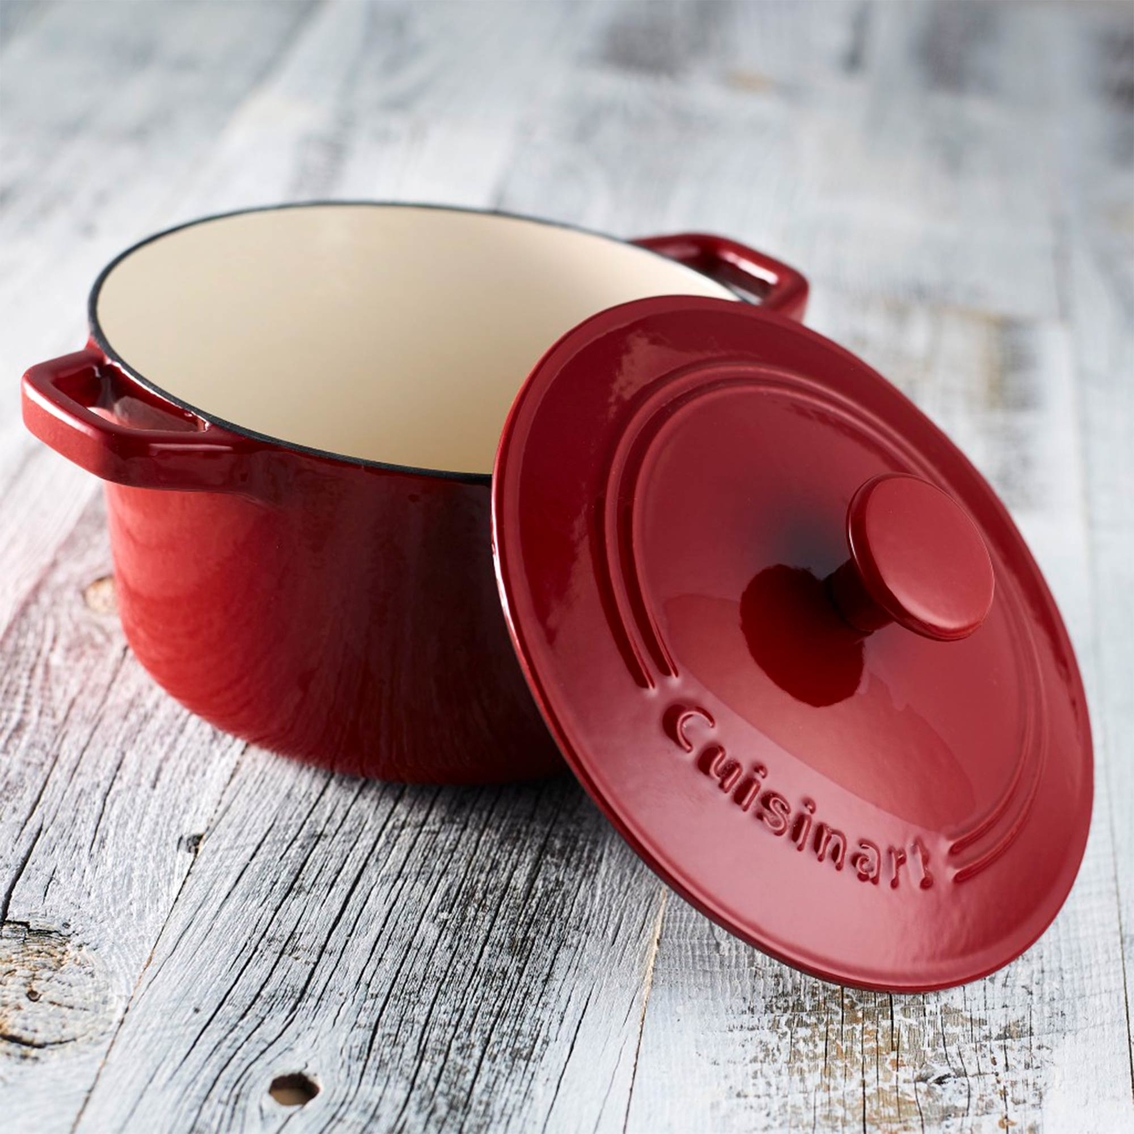 Cuisineart Chef's Classic Enameled Cast Iron 3-Quart Casserole Tray - Image 3 of 3